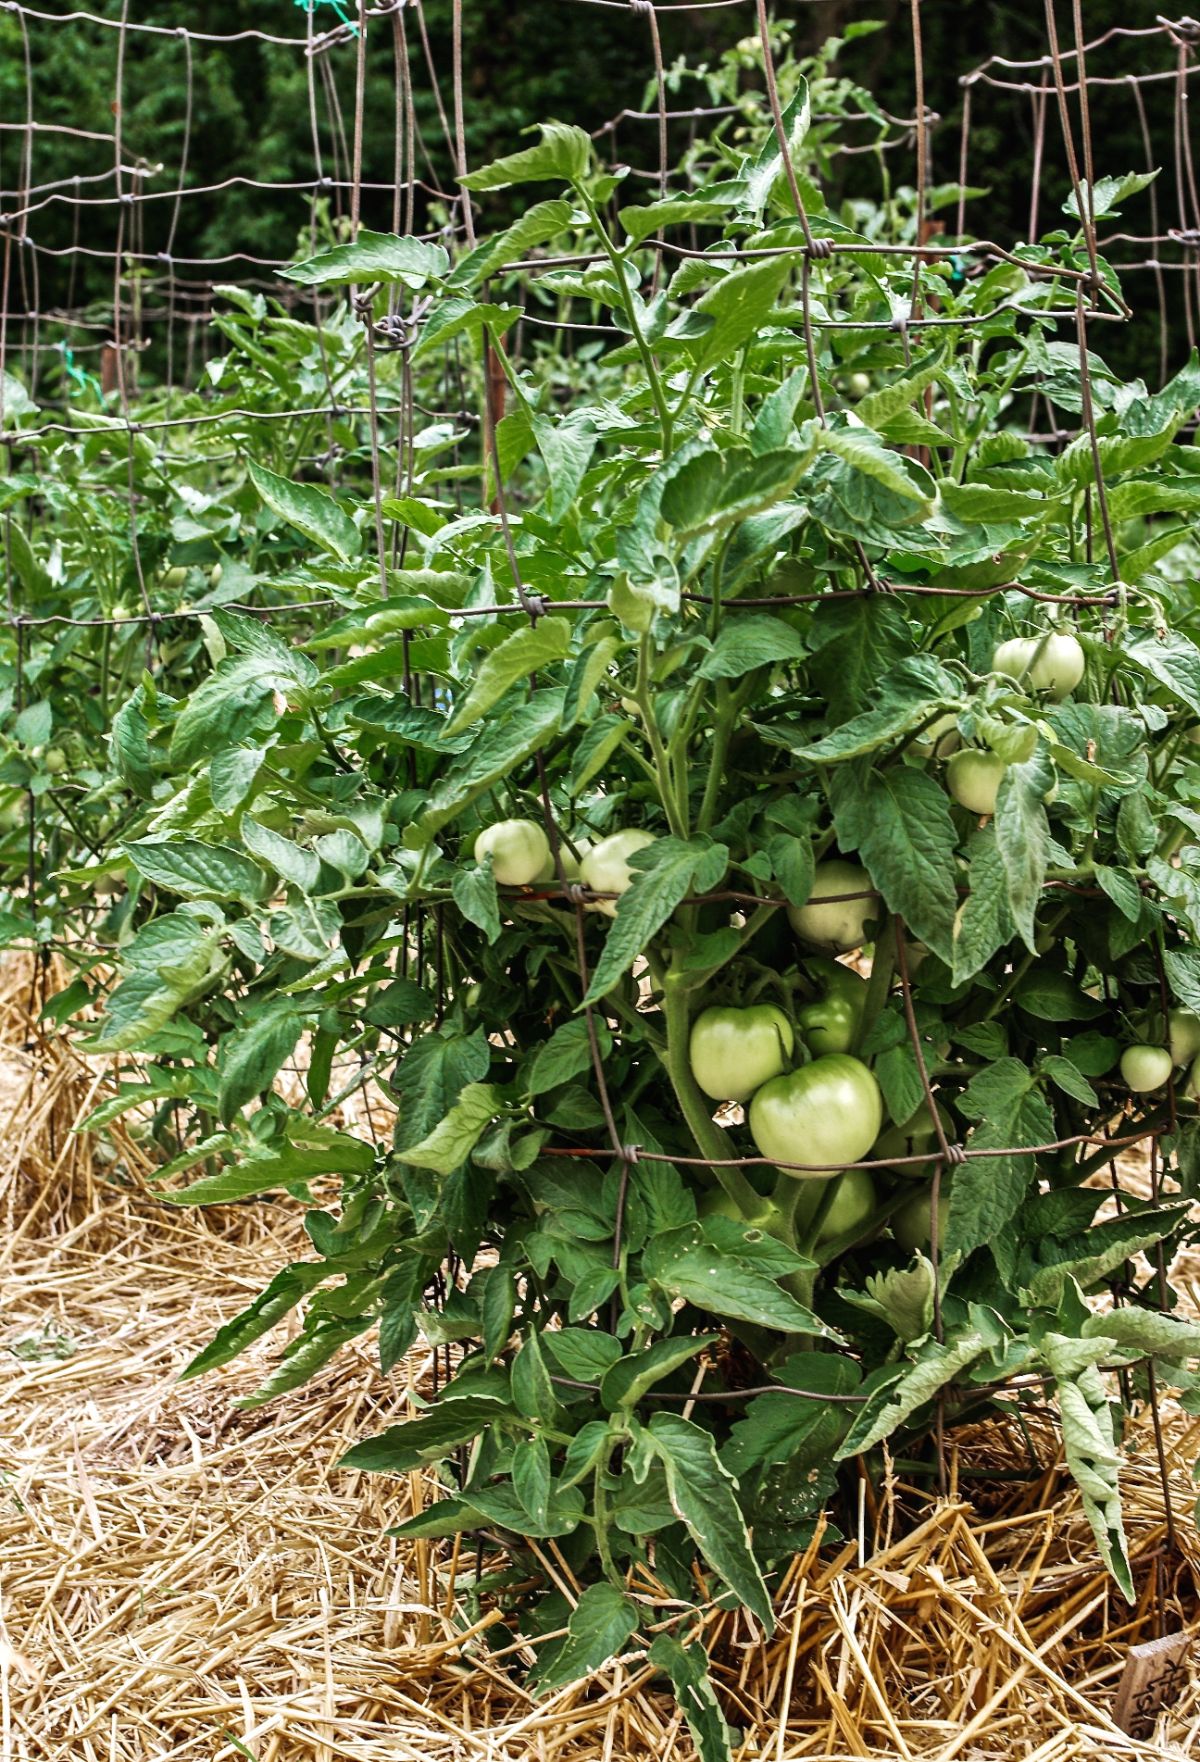 Tomato plants mulched with natural straw